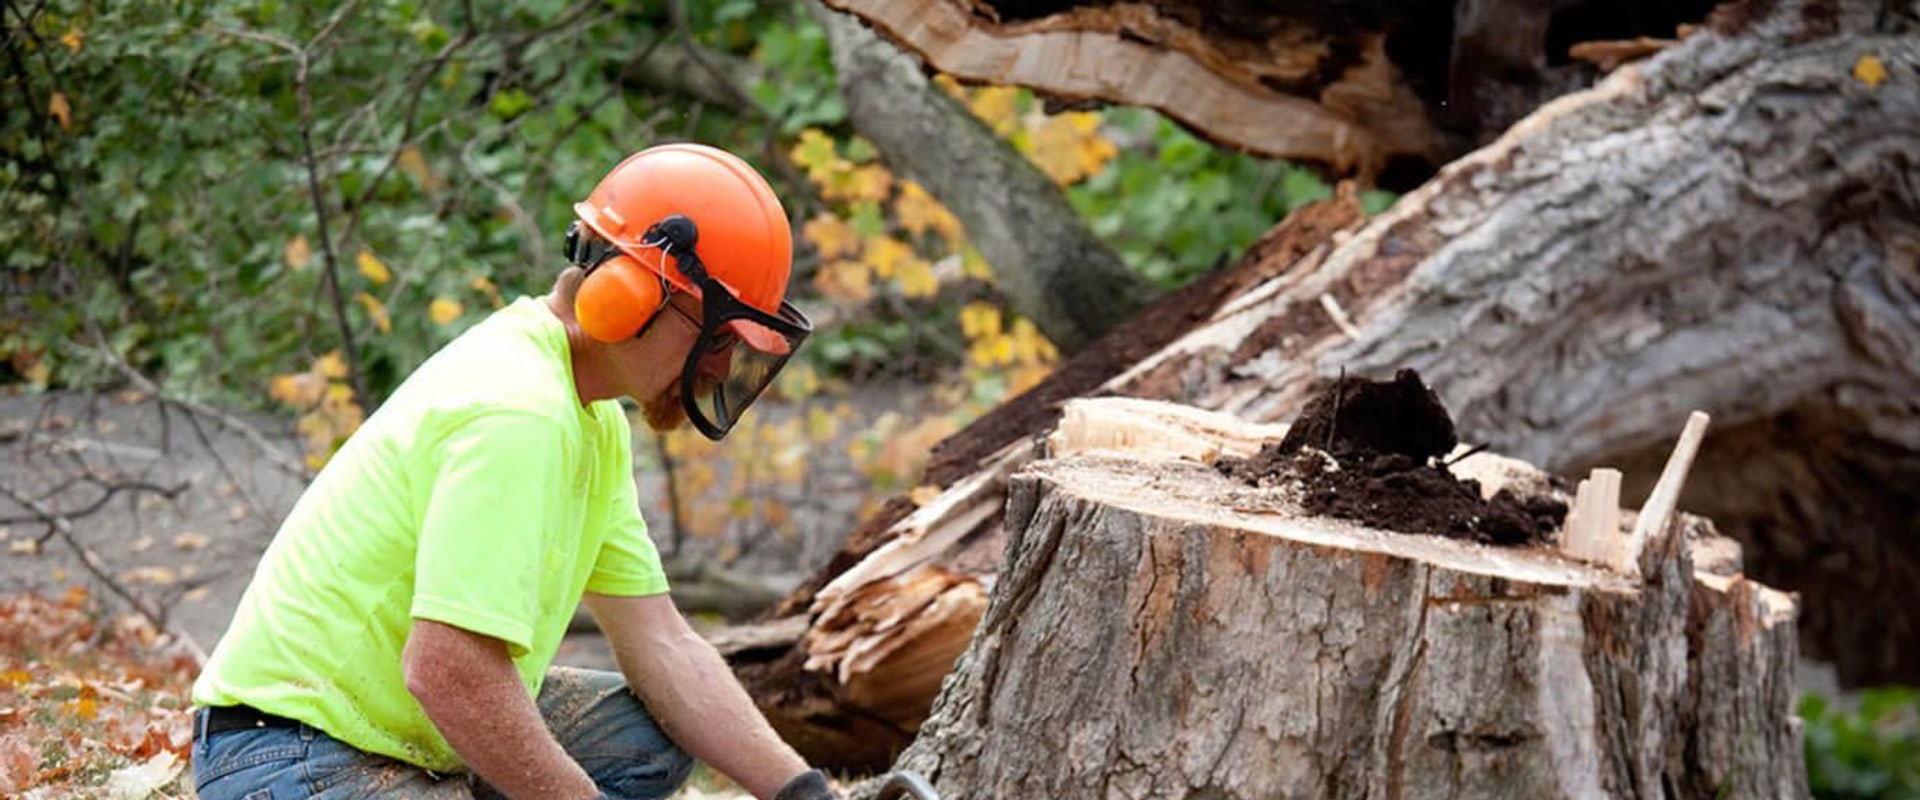 Tree Removal Service: What You Need to Know